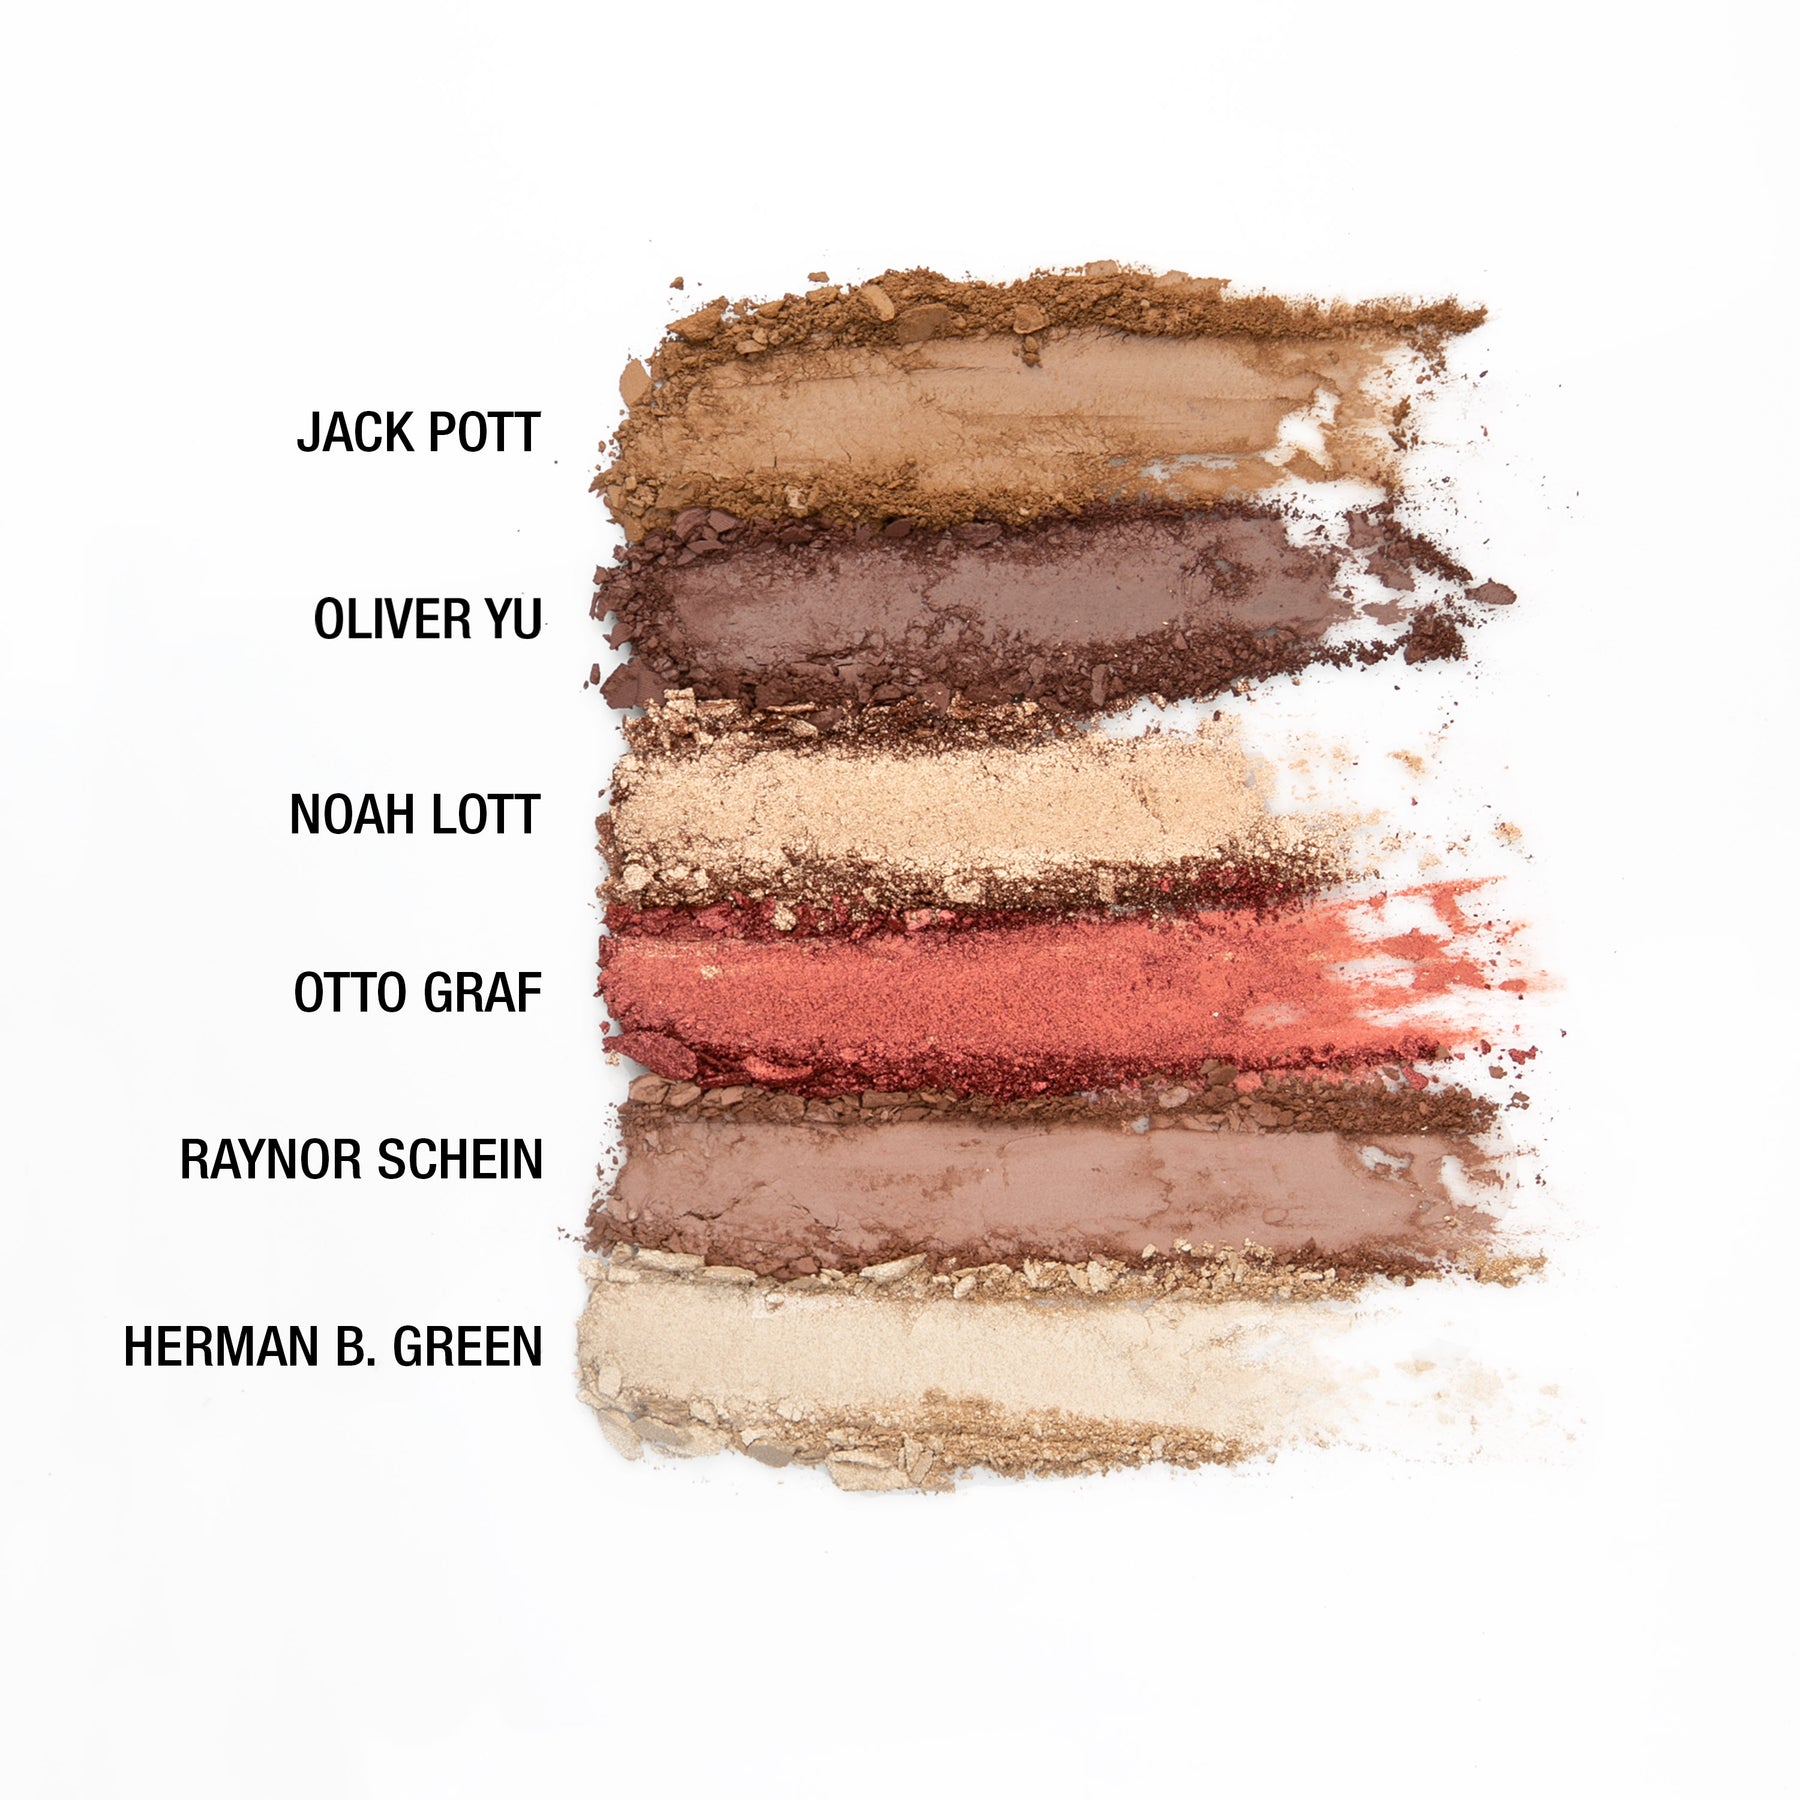 The Balm Male Order First Class Eyeshadow Palette - IZZAT DAOUK Lebanon